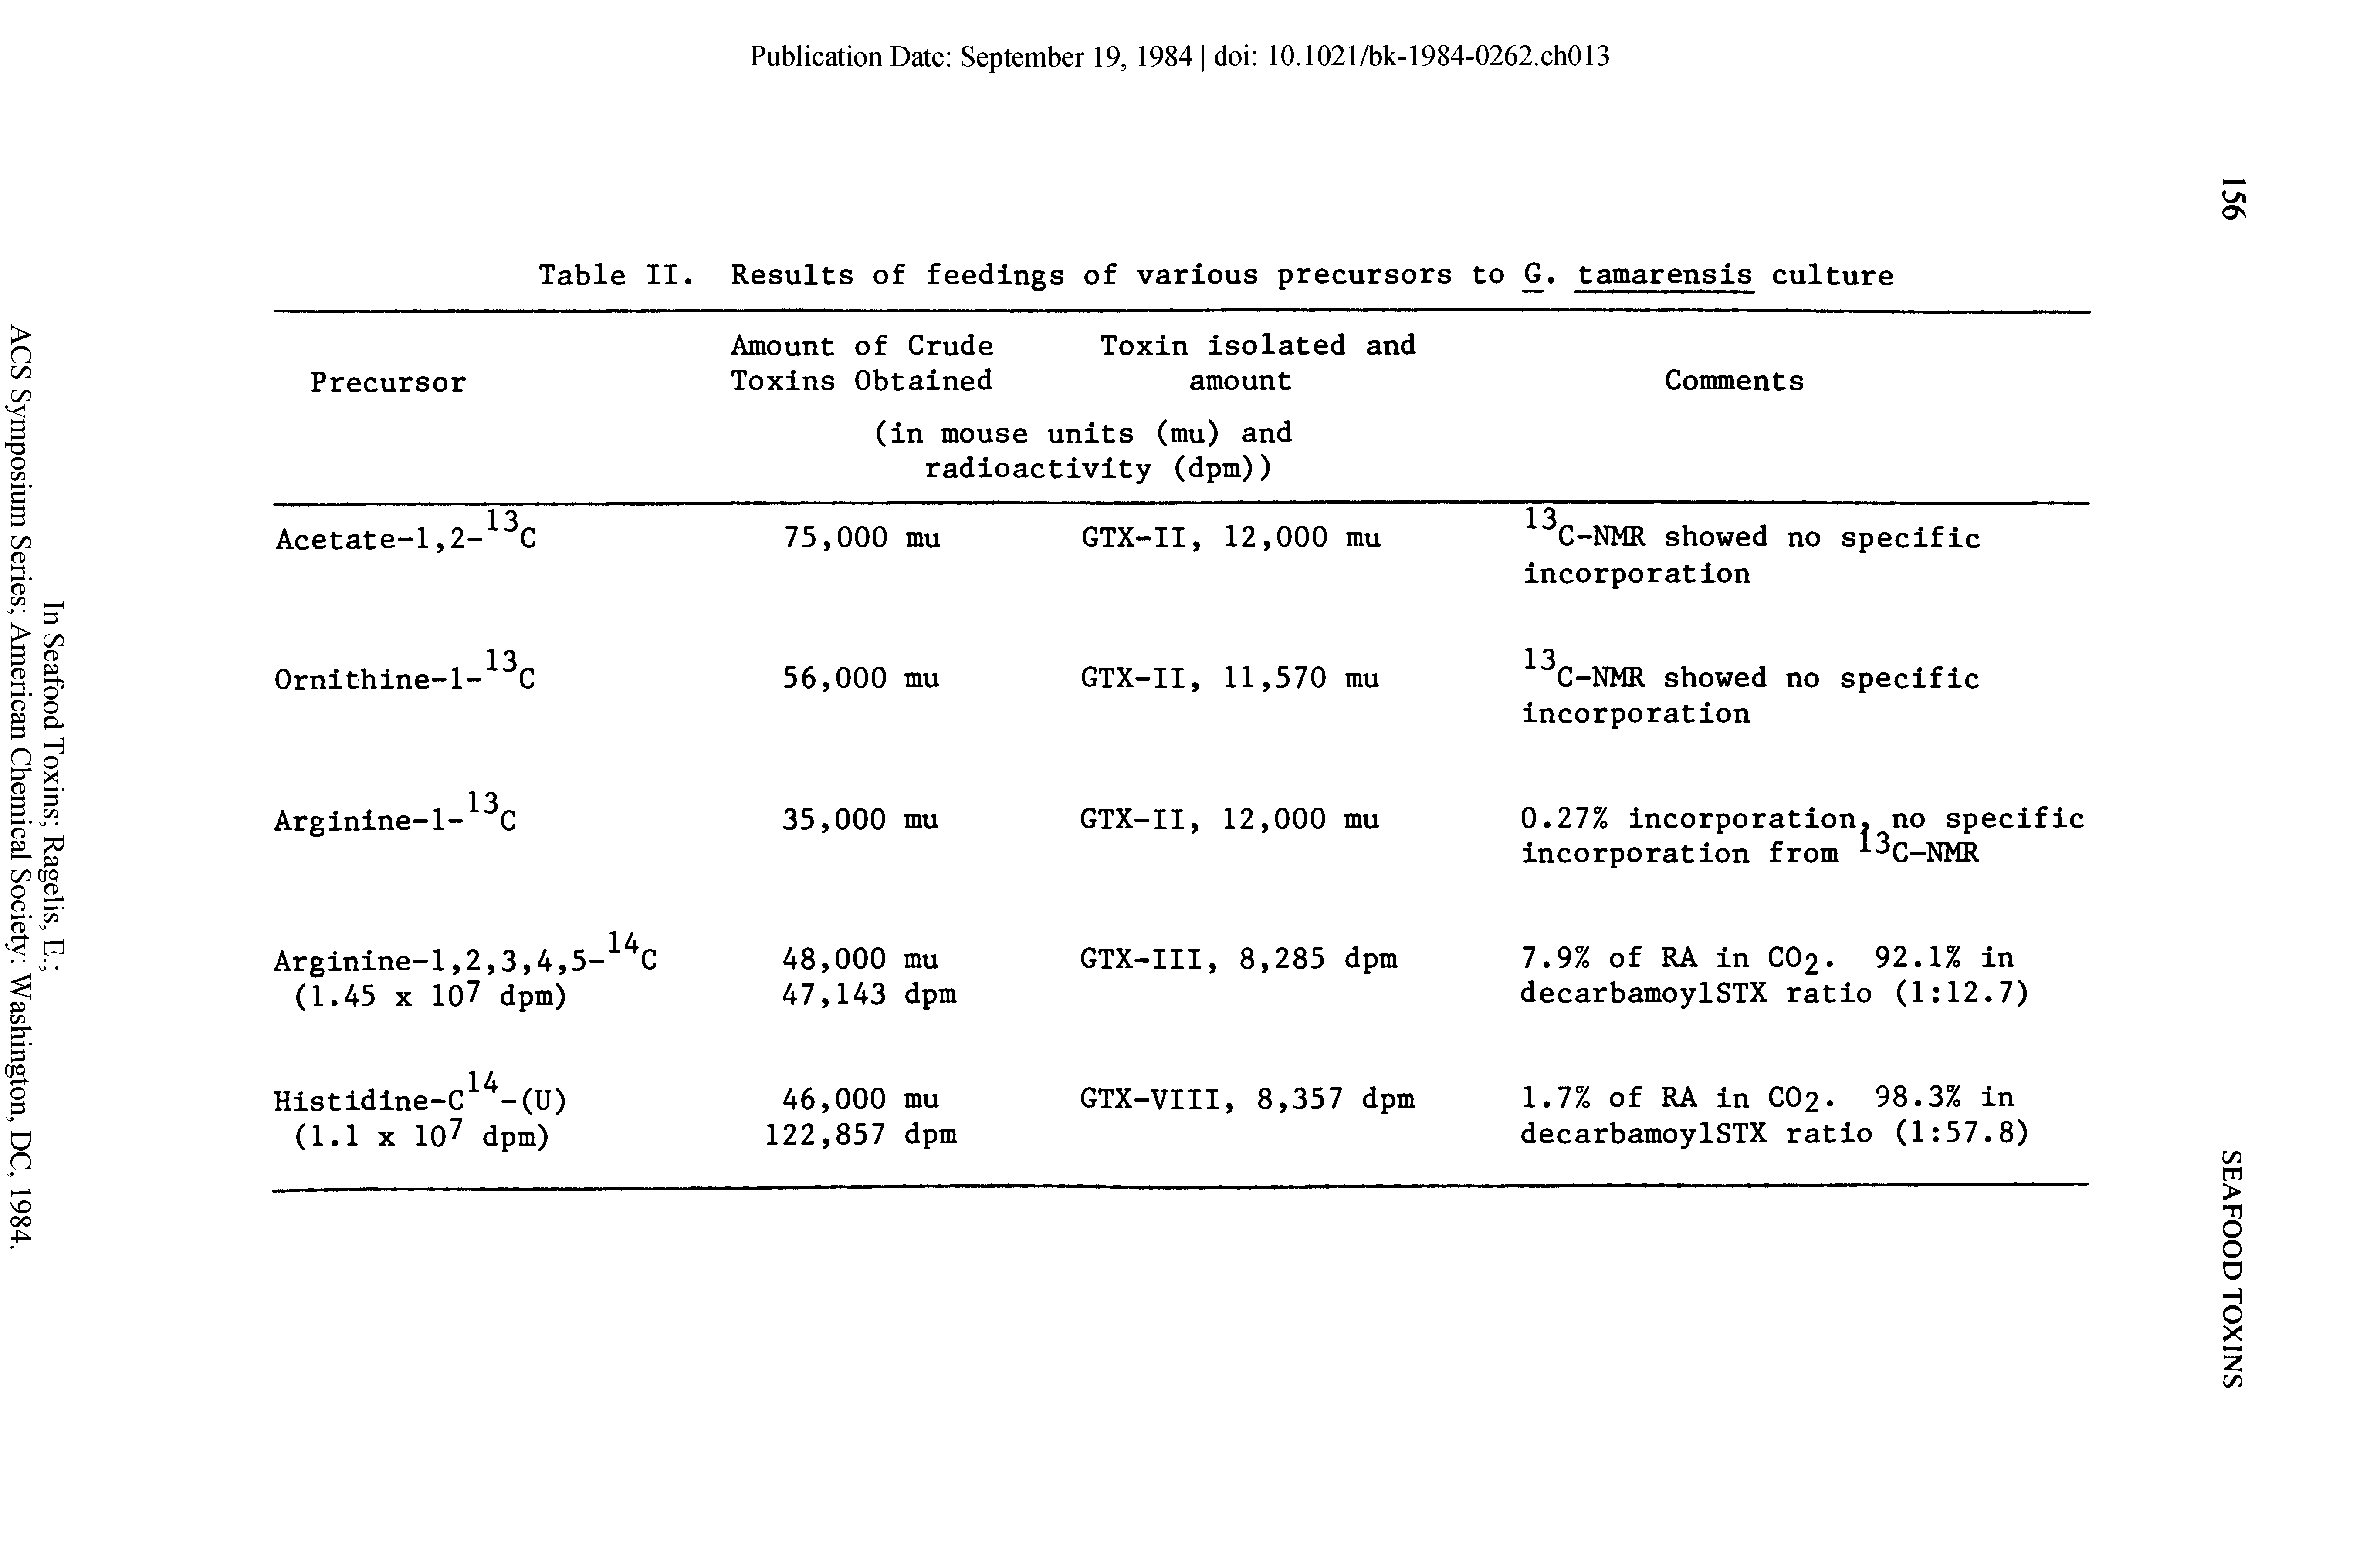 Table II. Results of feedings of various precursors to tamarensis culture...